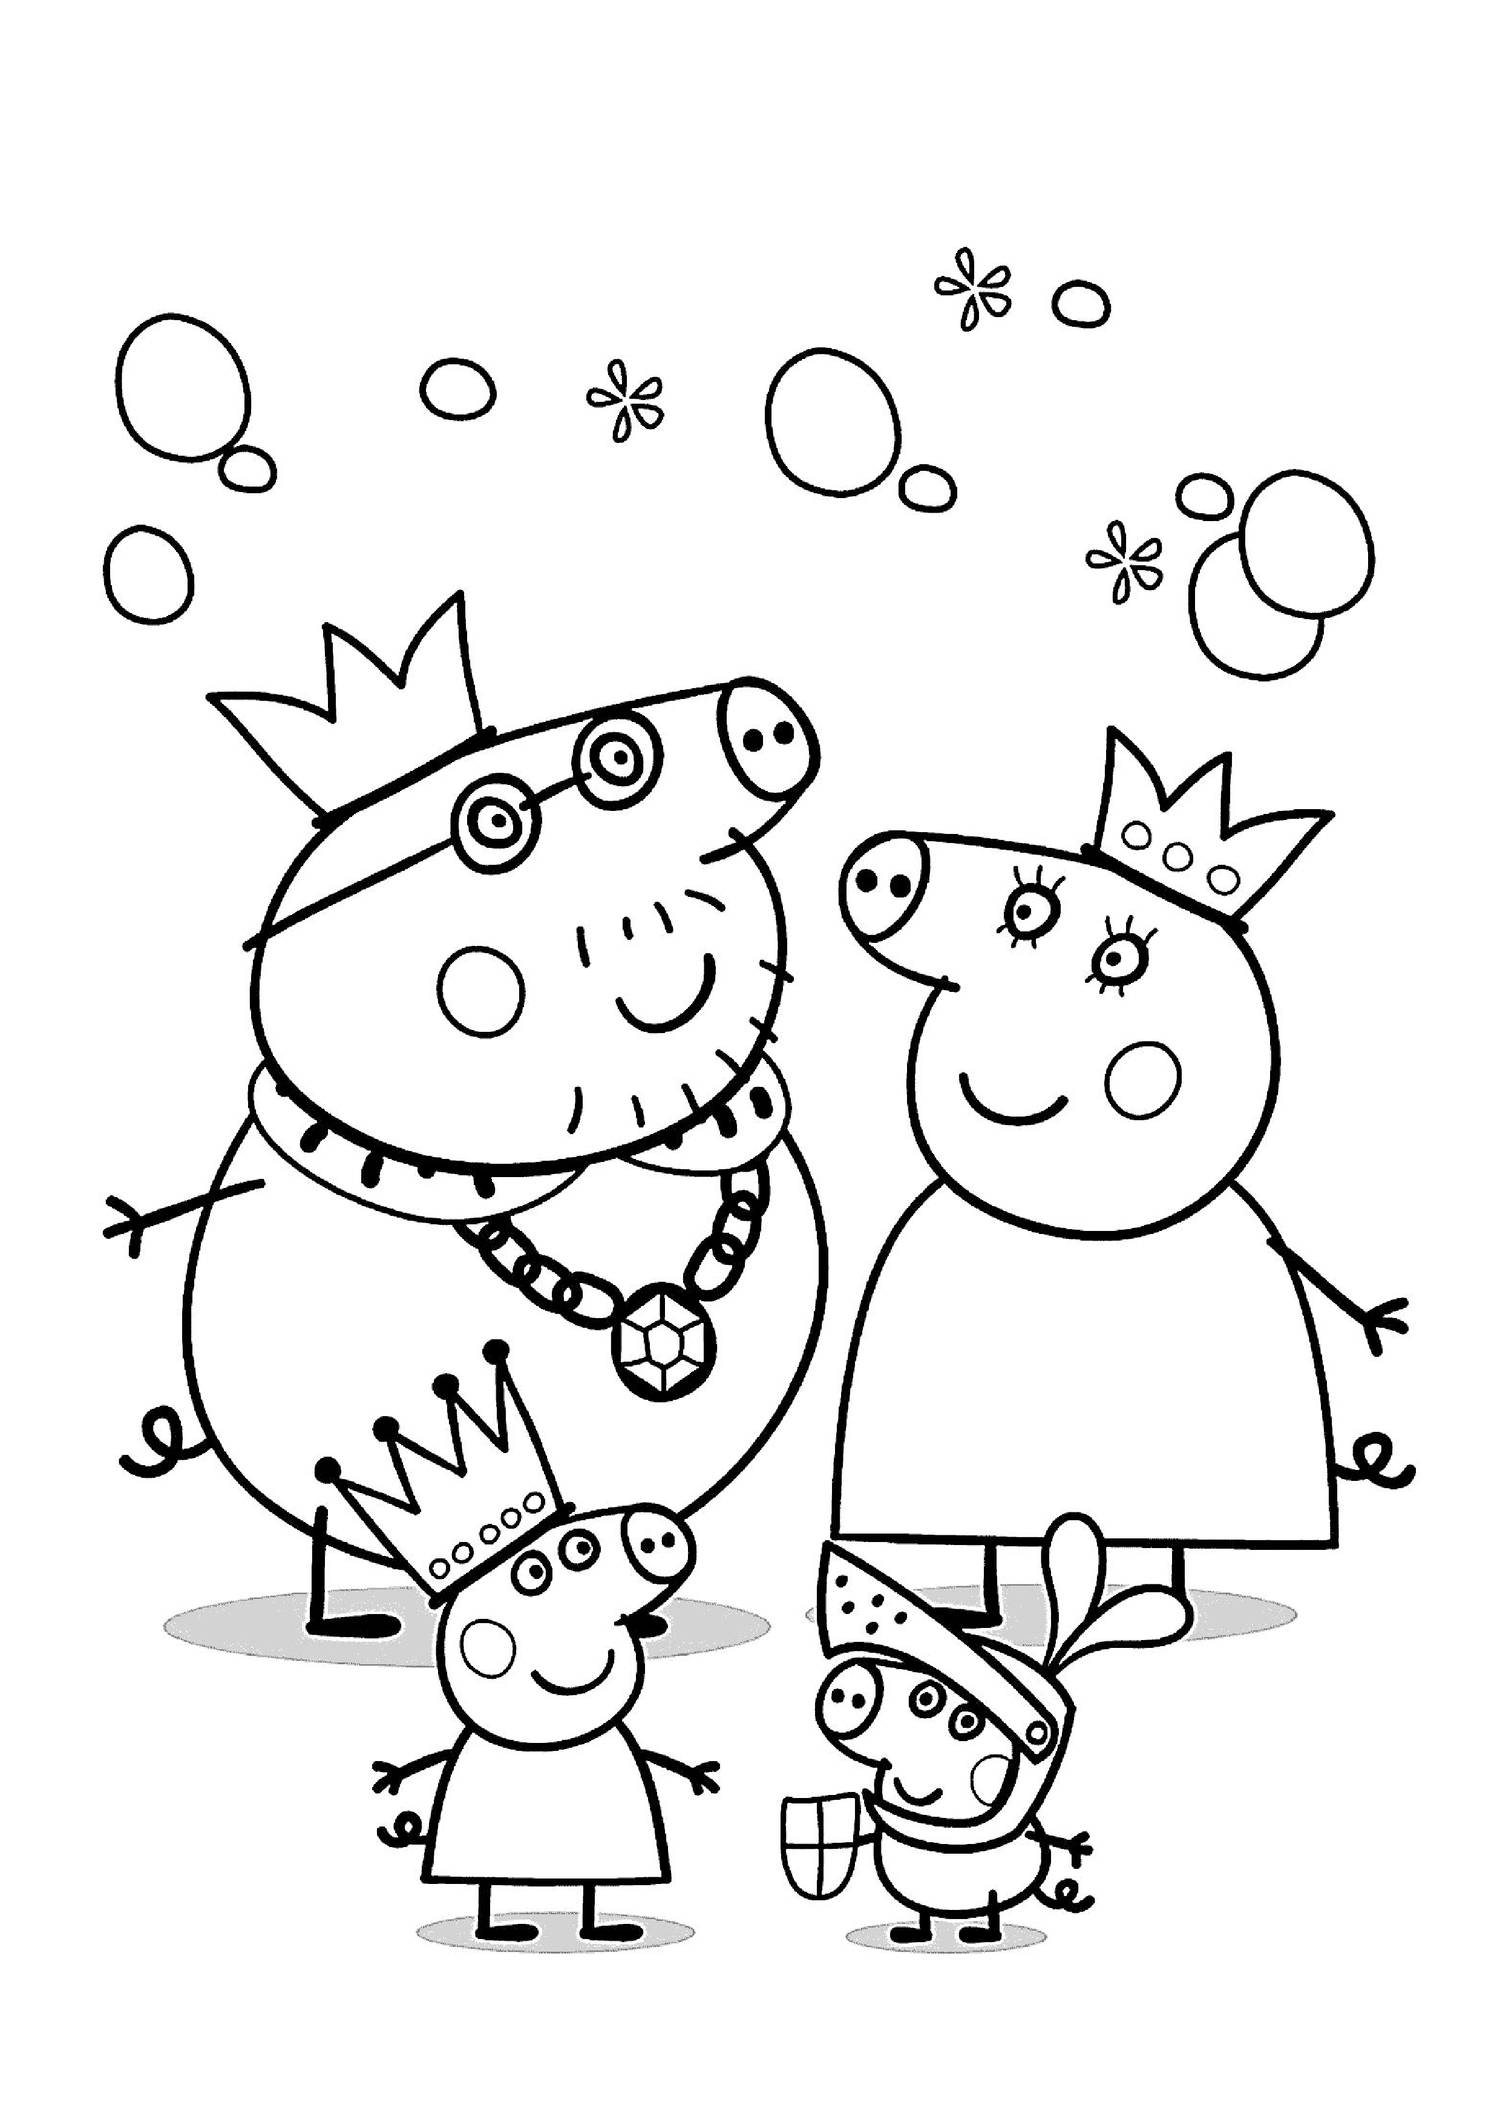 Download Peppa Pig Coloring Pages Pdf Printable Coloring Data Community